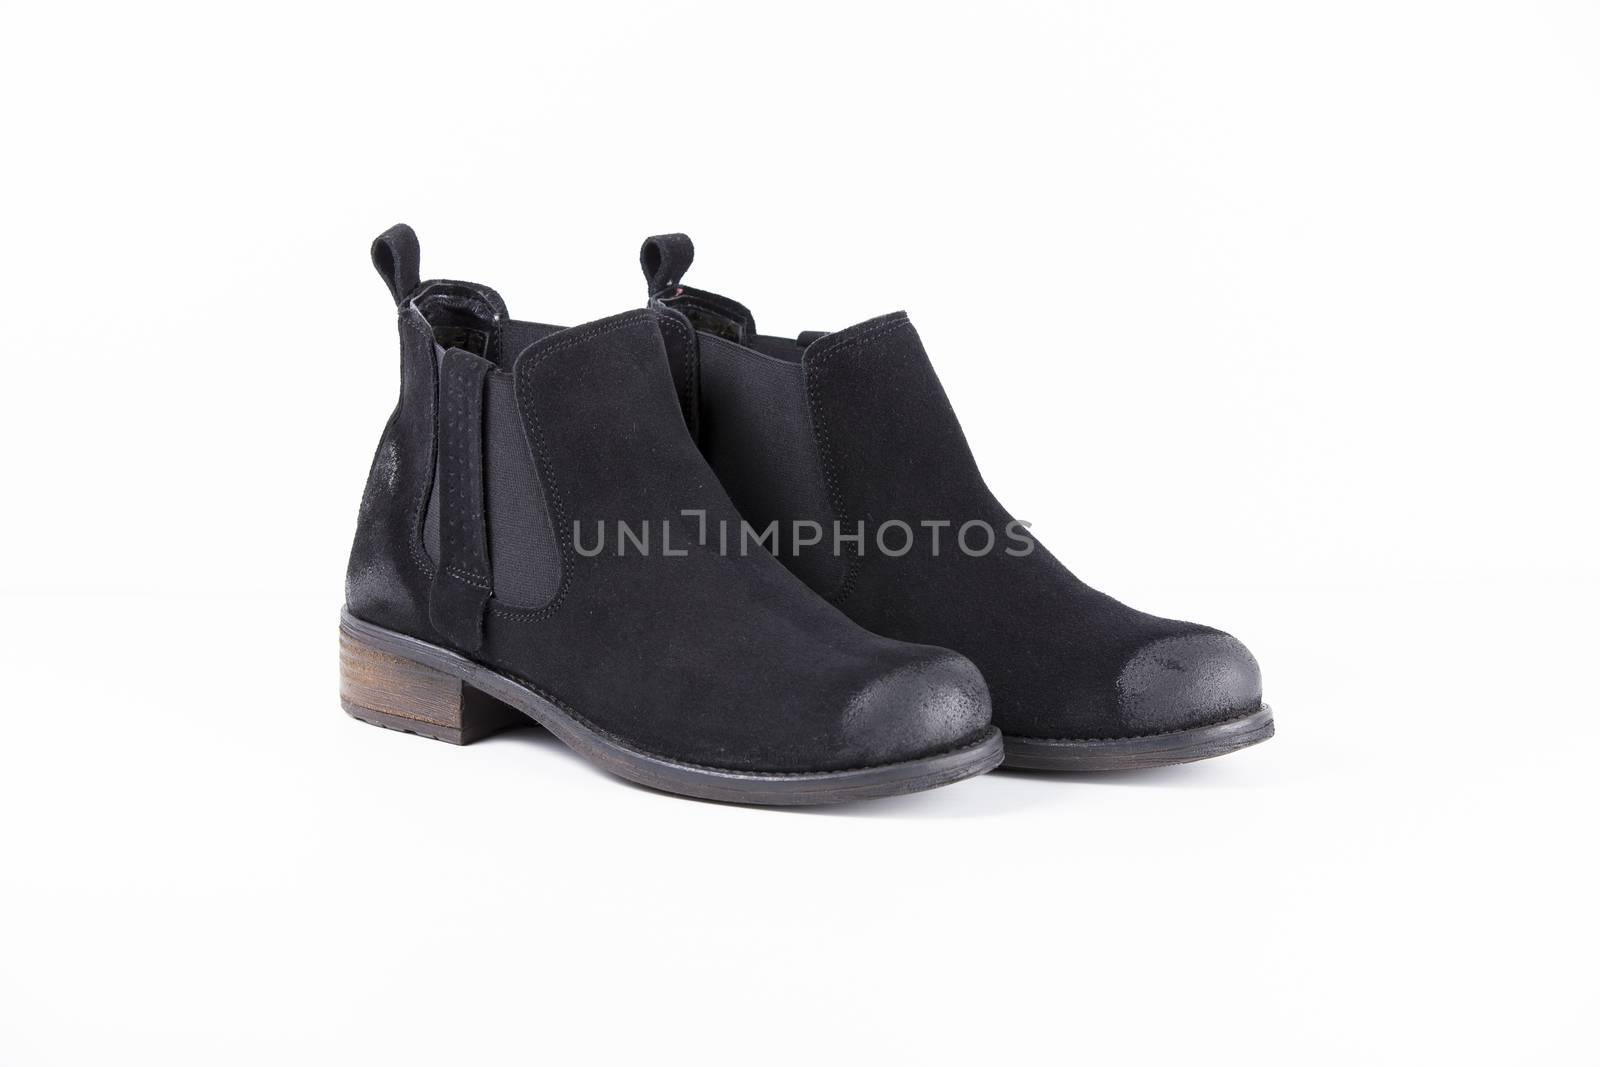 Pair of black leather boots on white background, isolated product.